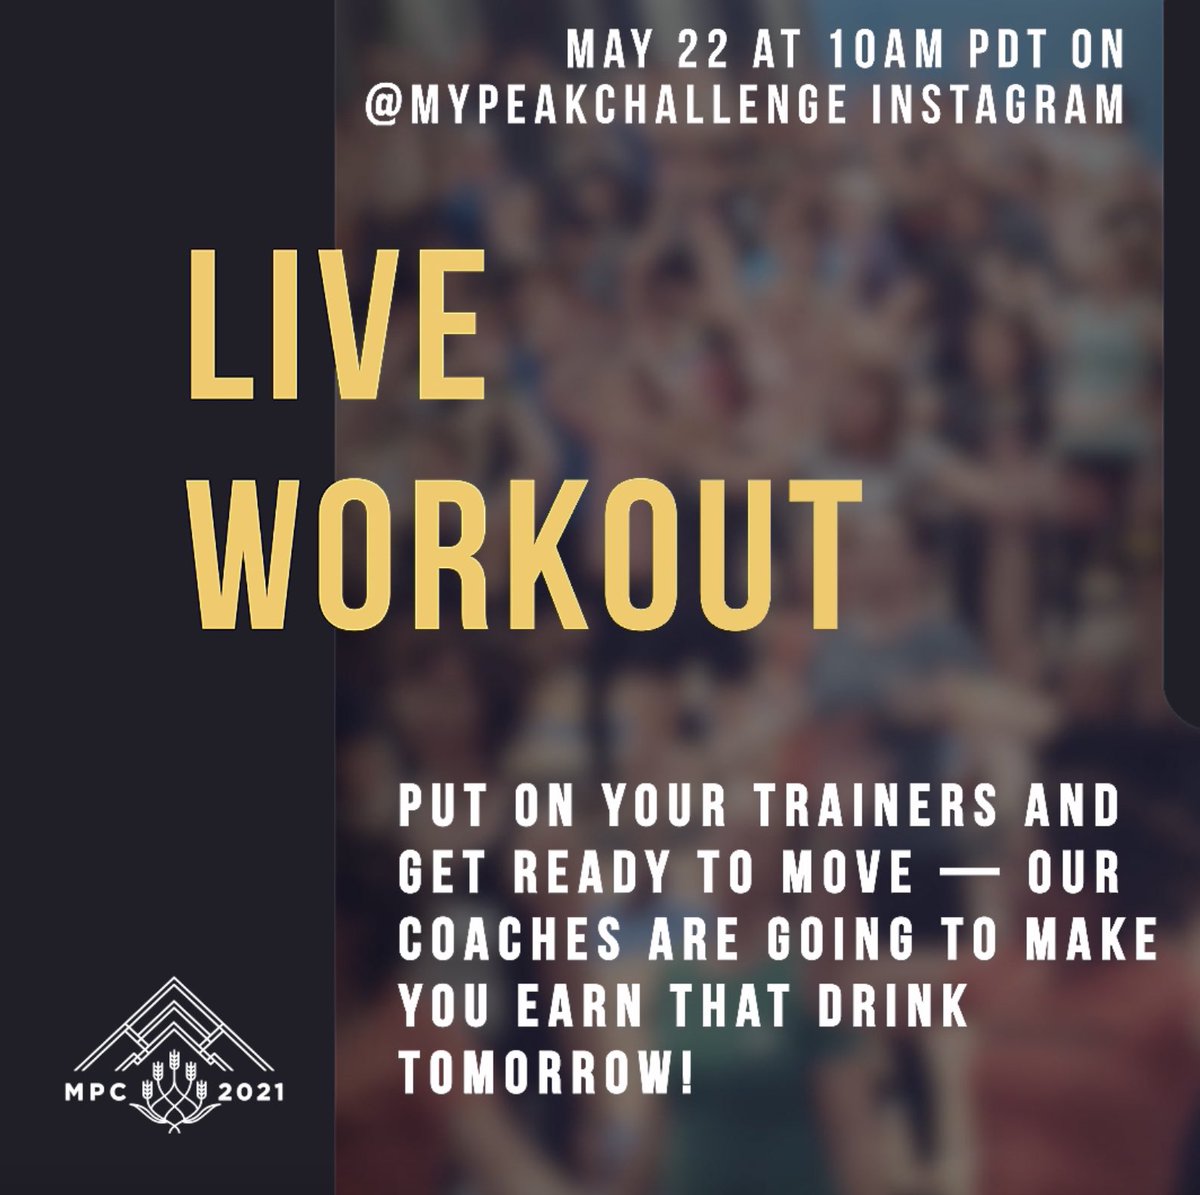 Let’s get ready to sweat! Tune in for a live workout on @MyPeakChallenge Instagram at 10AM PDT today 💪

#MyPeakChallenge
#MPC2021
#MPCVirtualGala
#SamHeughan